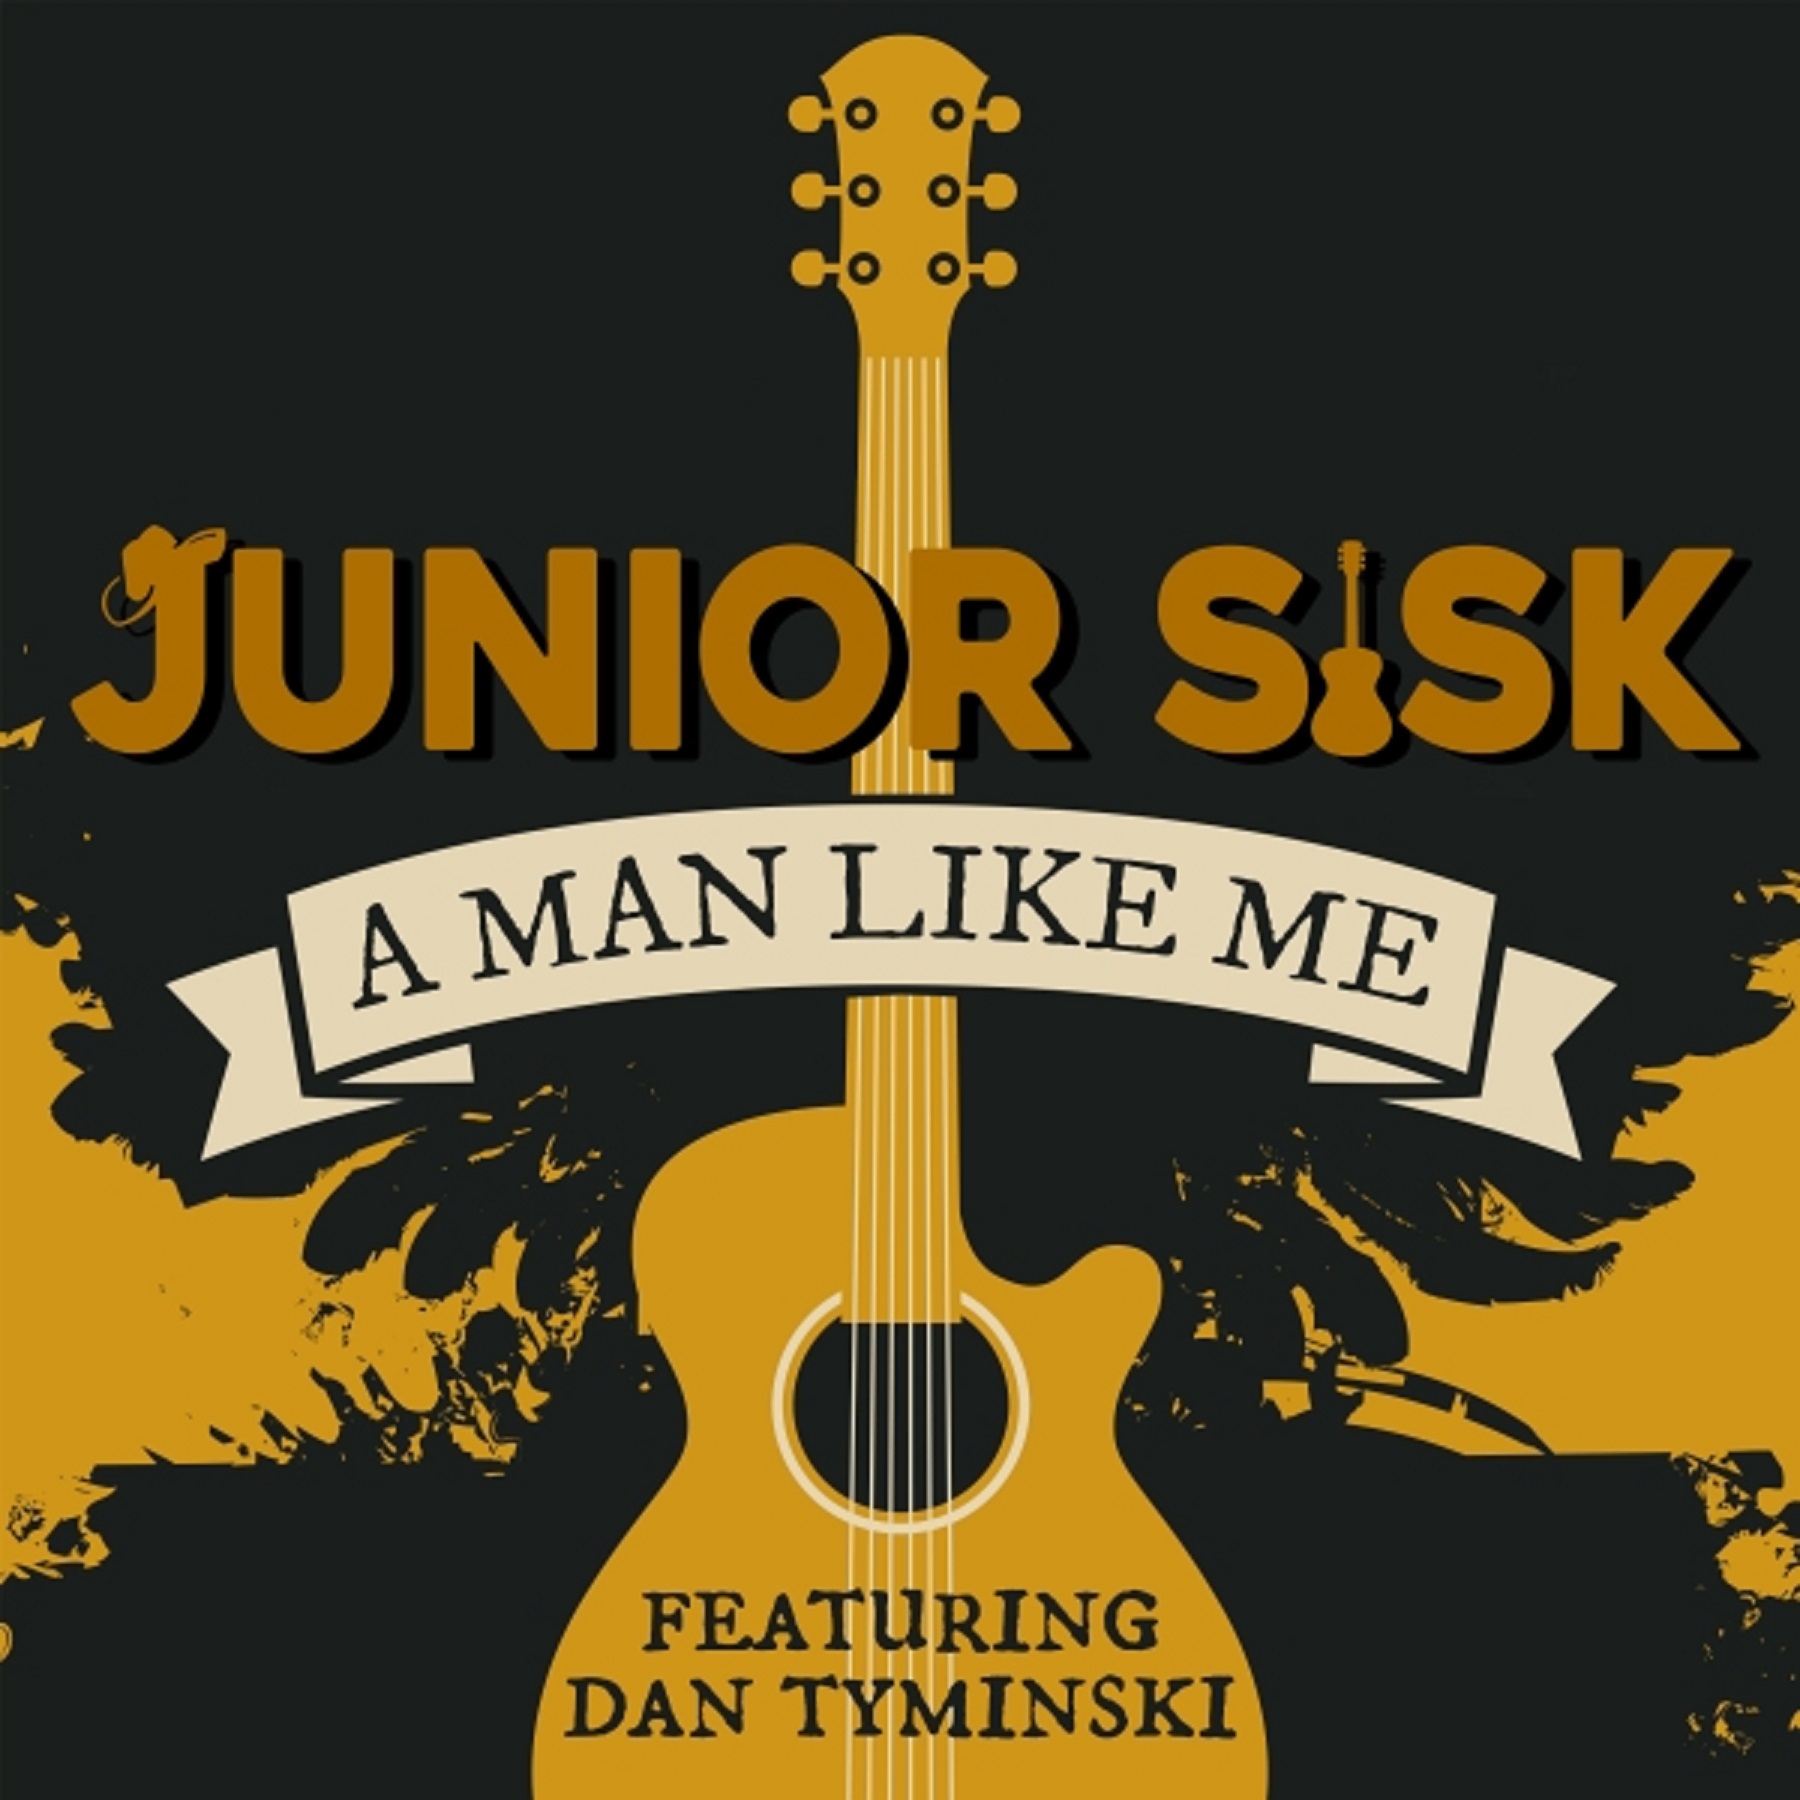 Junior Sisk will be releasing a single featuring Dan Tyminski on January 12, titled "A Man Like Me"